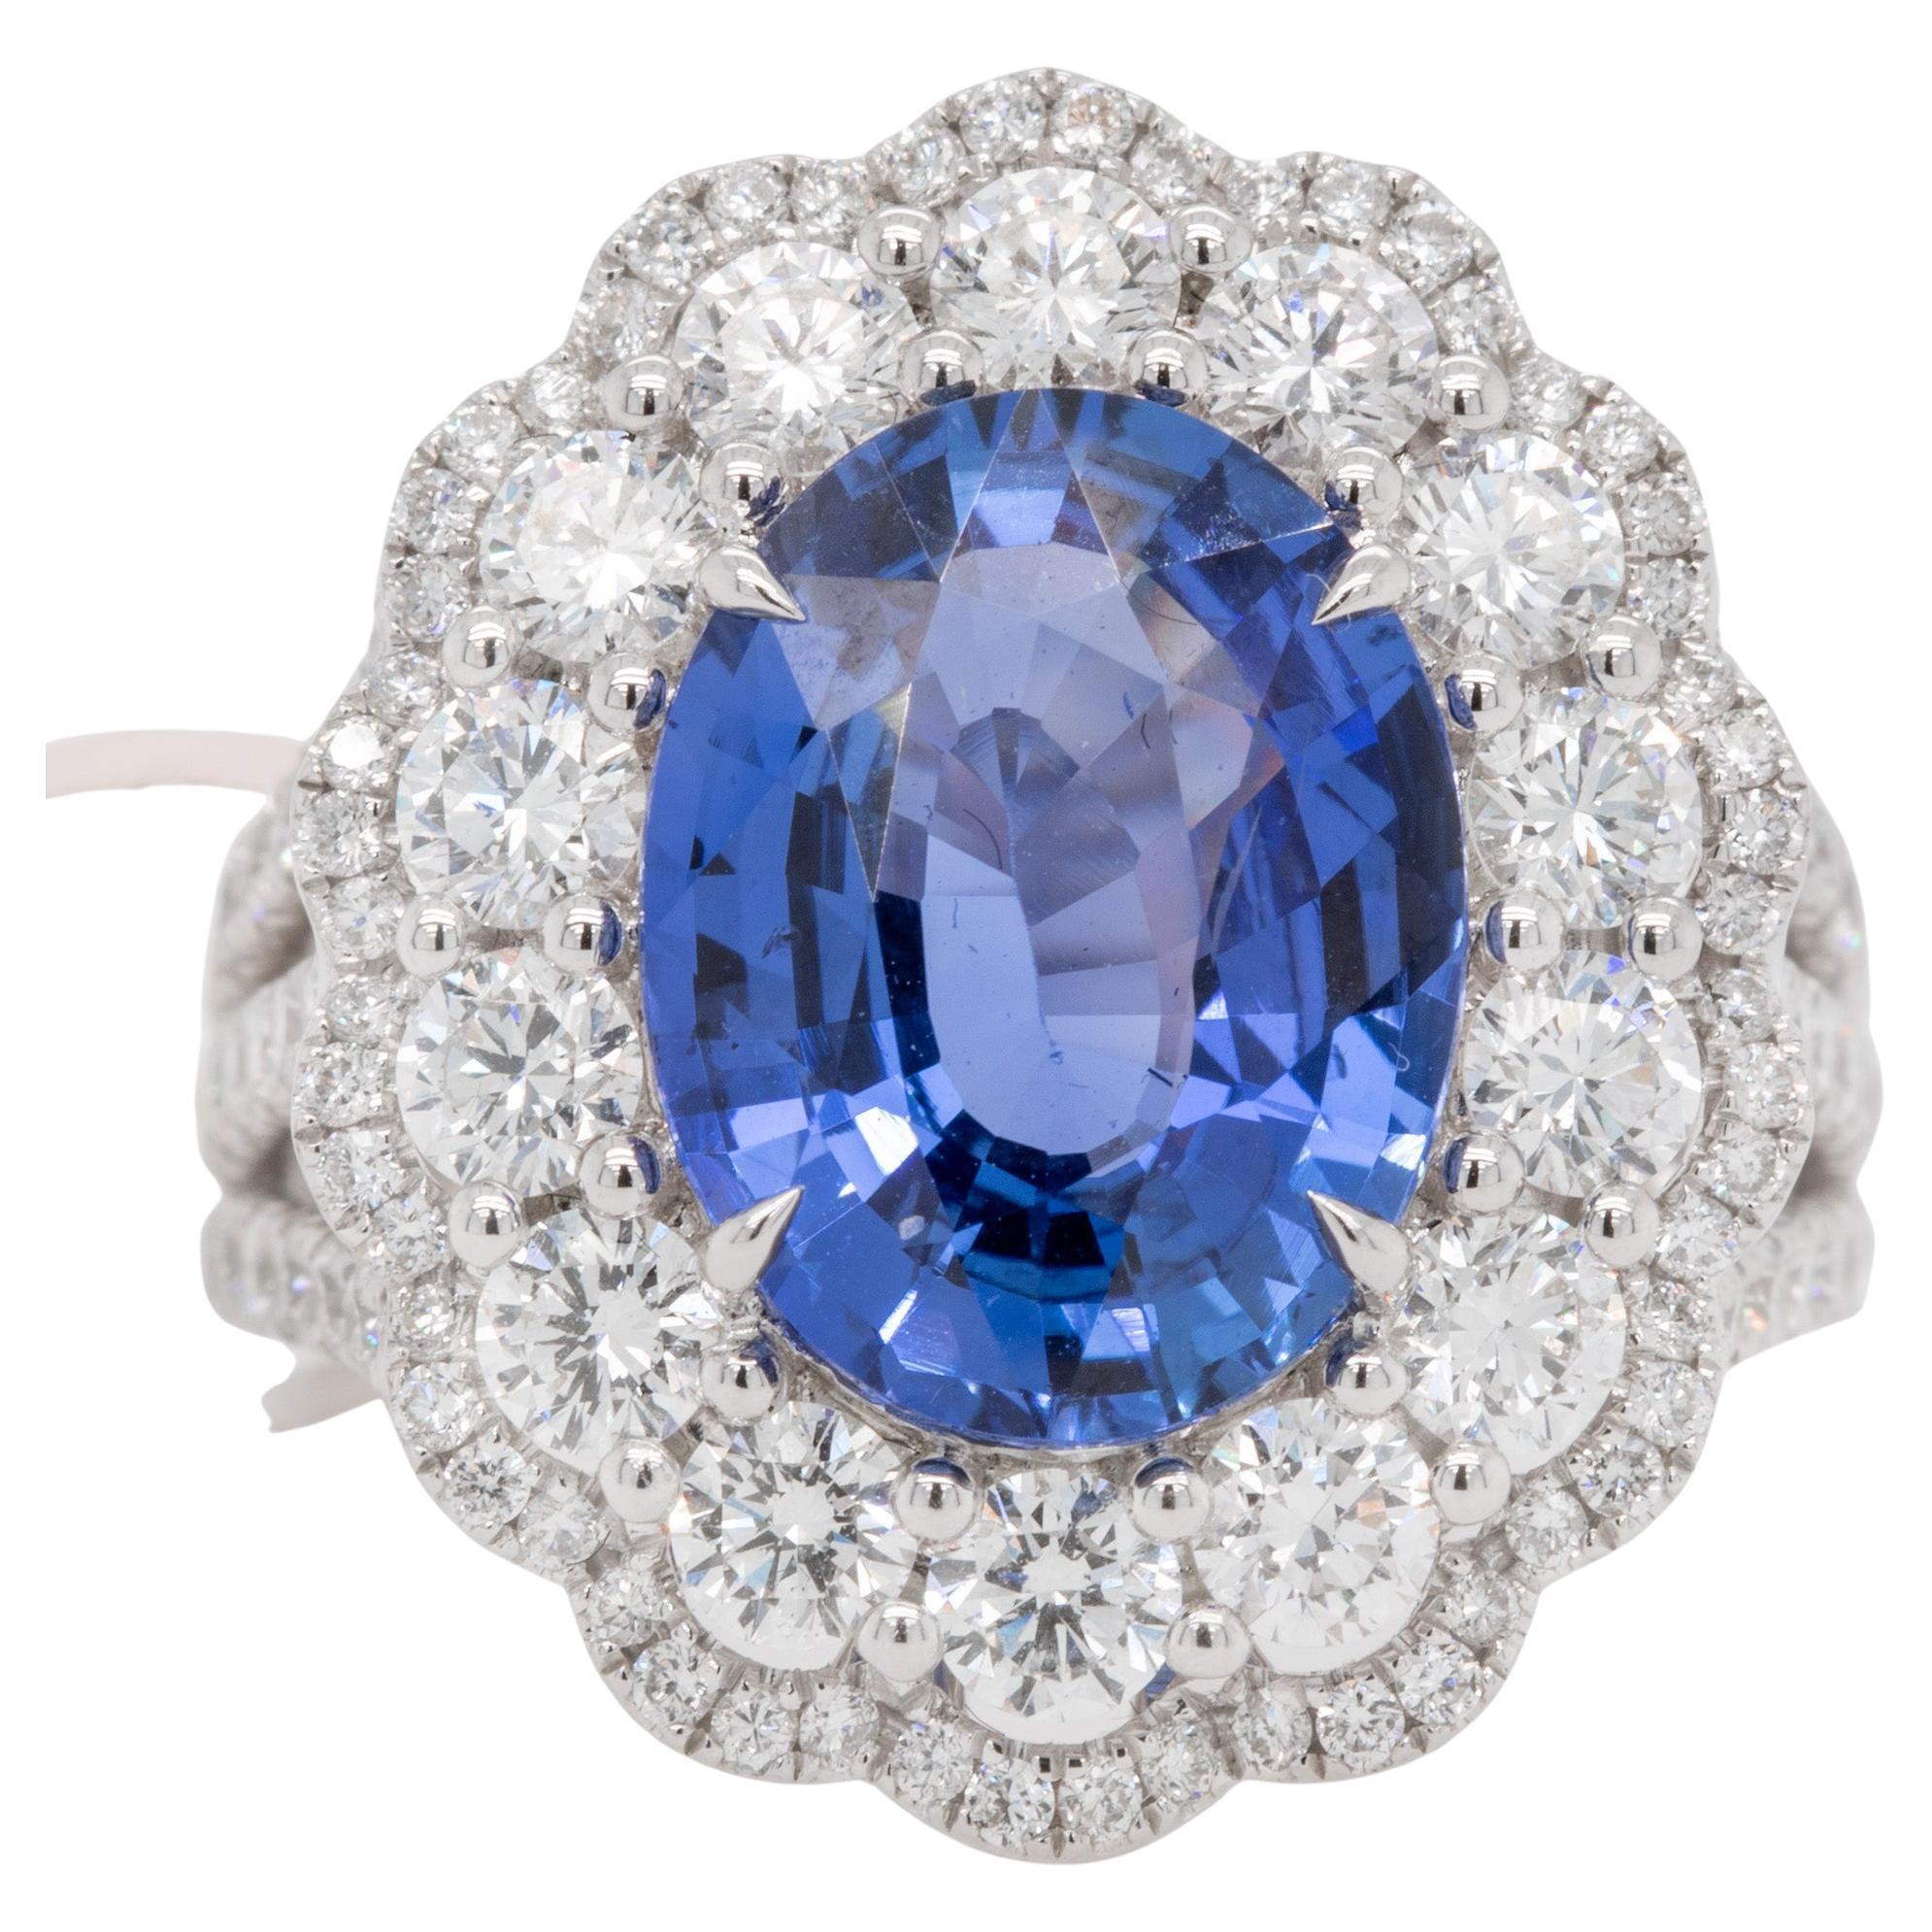 Sapphire 5.83 Carat Ring with Diamonds 2.45 Carats Total 18k Gold